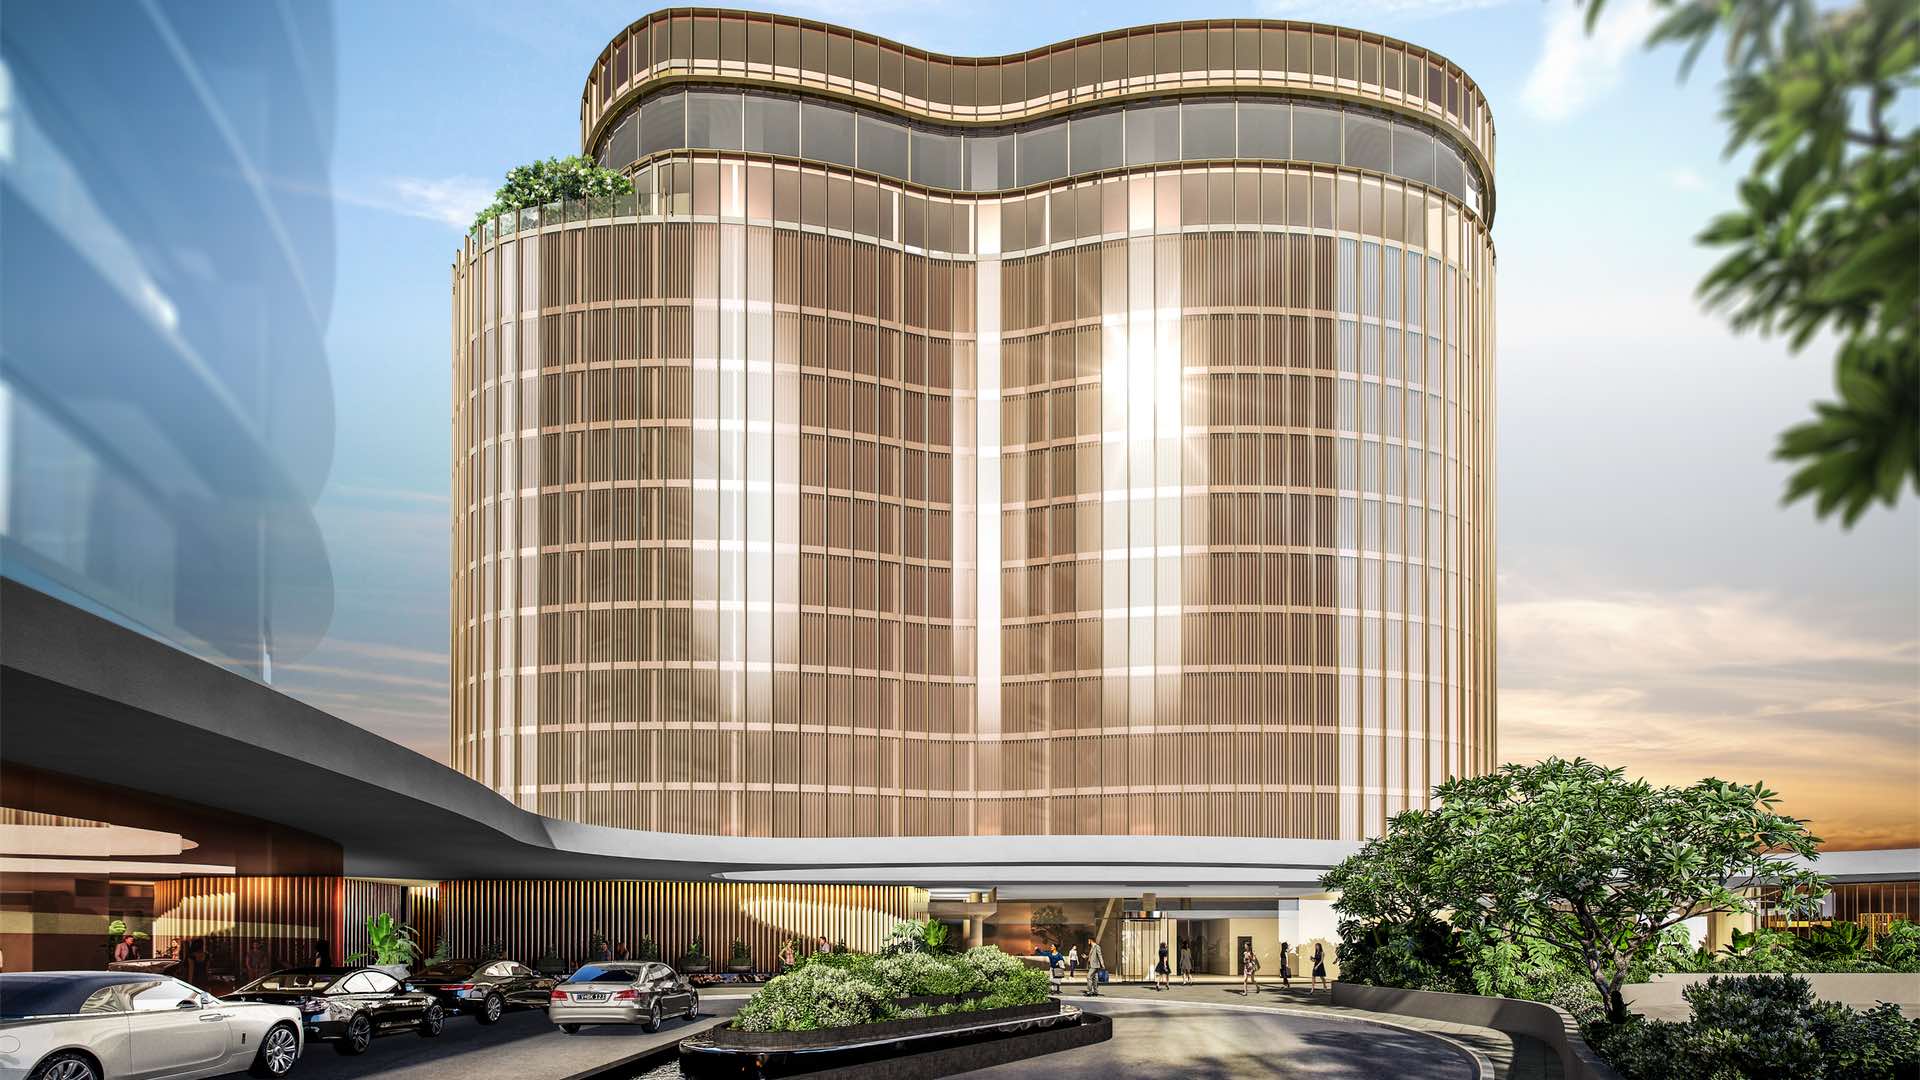 Chadstone Shopping Centre Is Set to Score Its Own Luxury 13-Storey Hotel